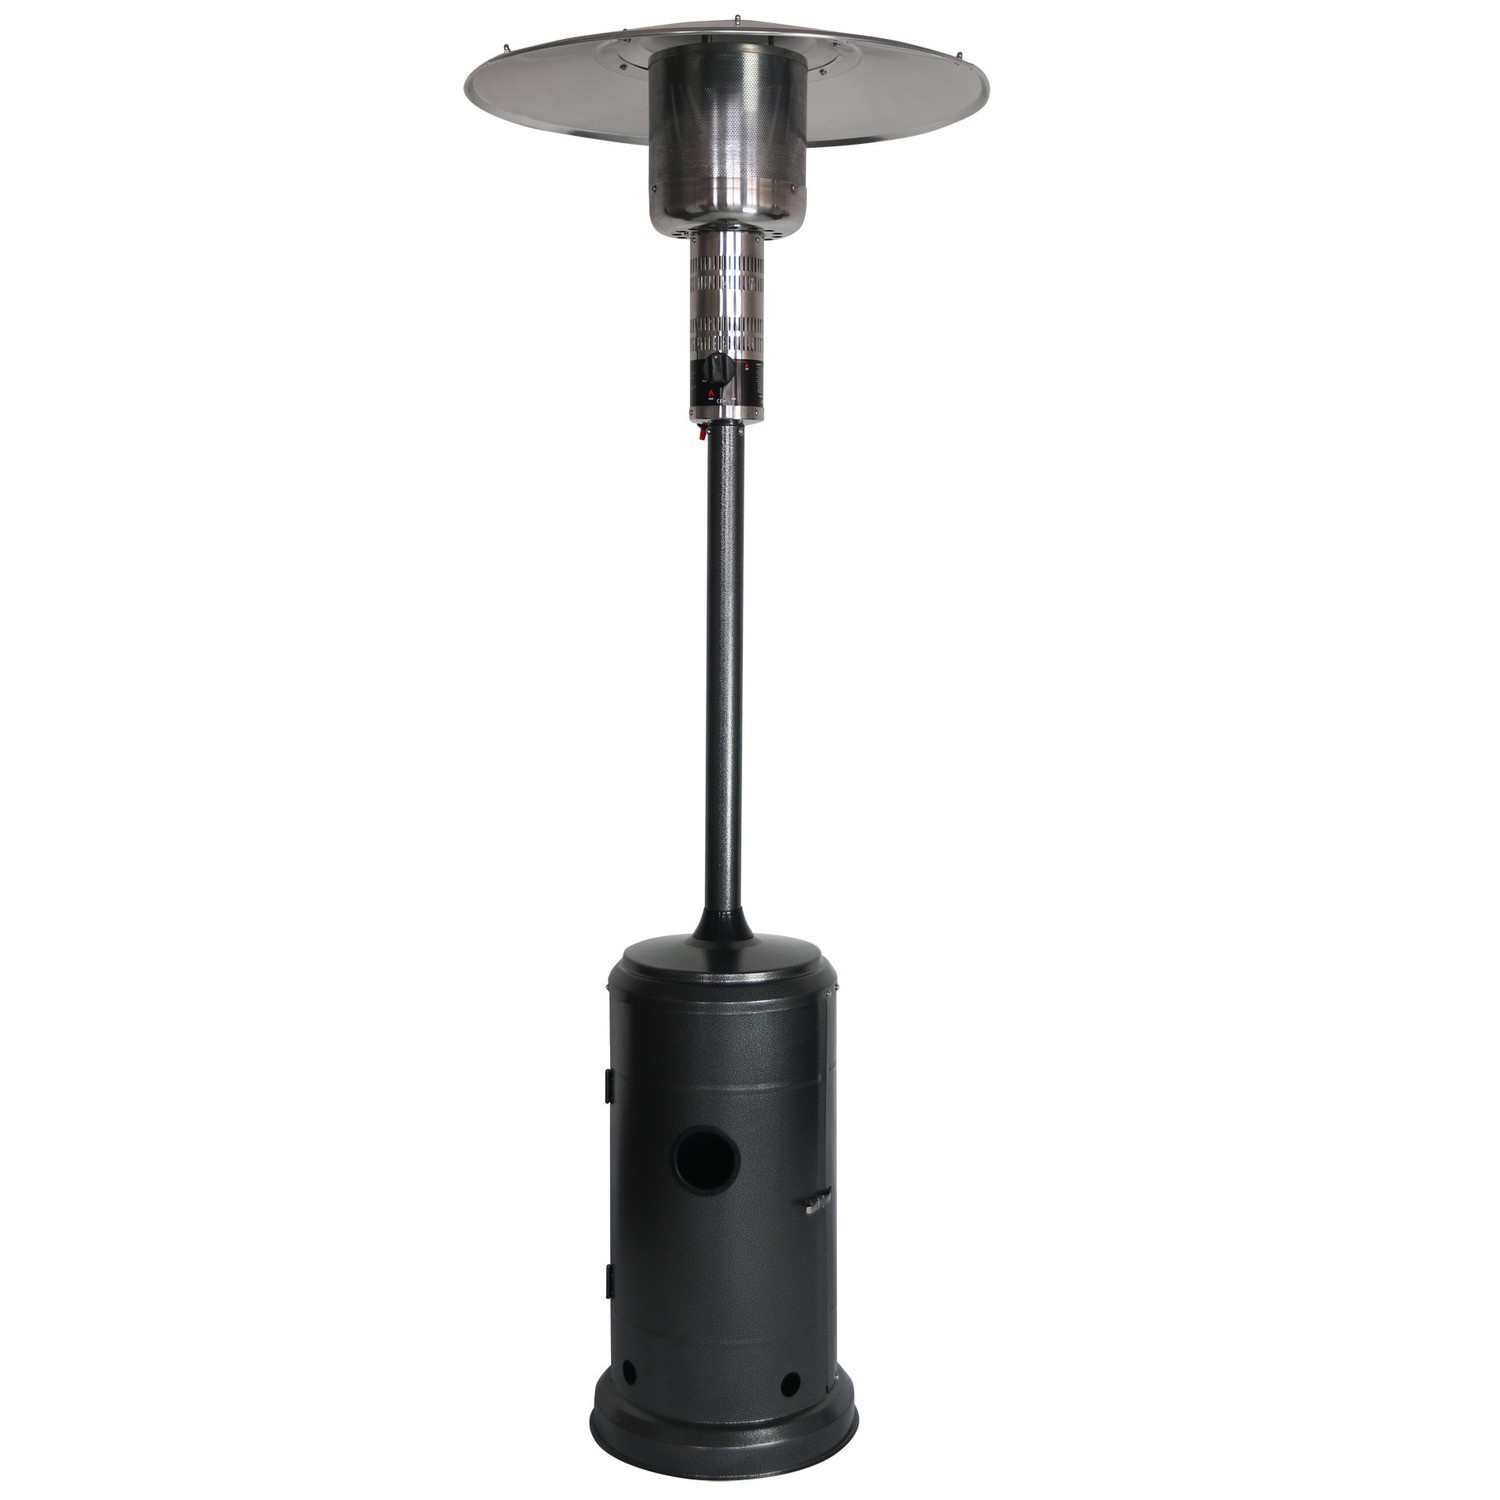 Mushroom Outdoor Gas Patio Heater - Black with Free Cover